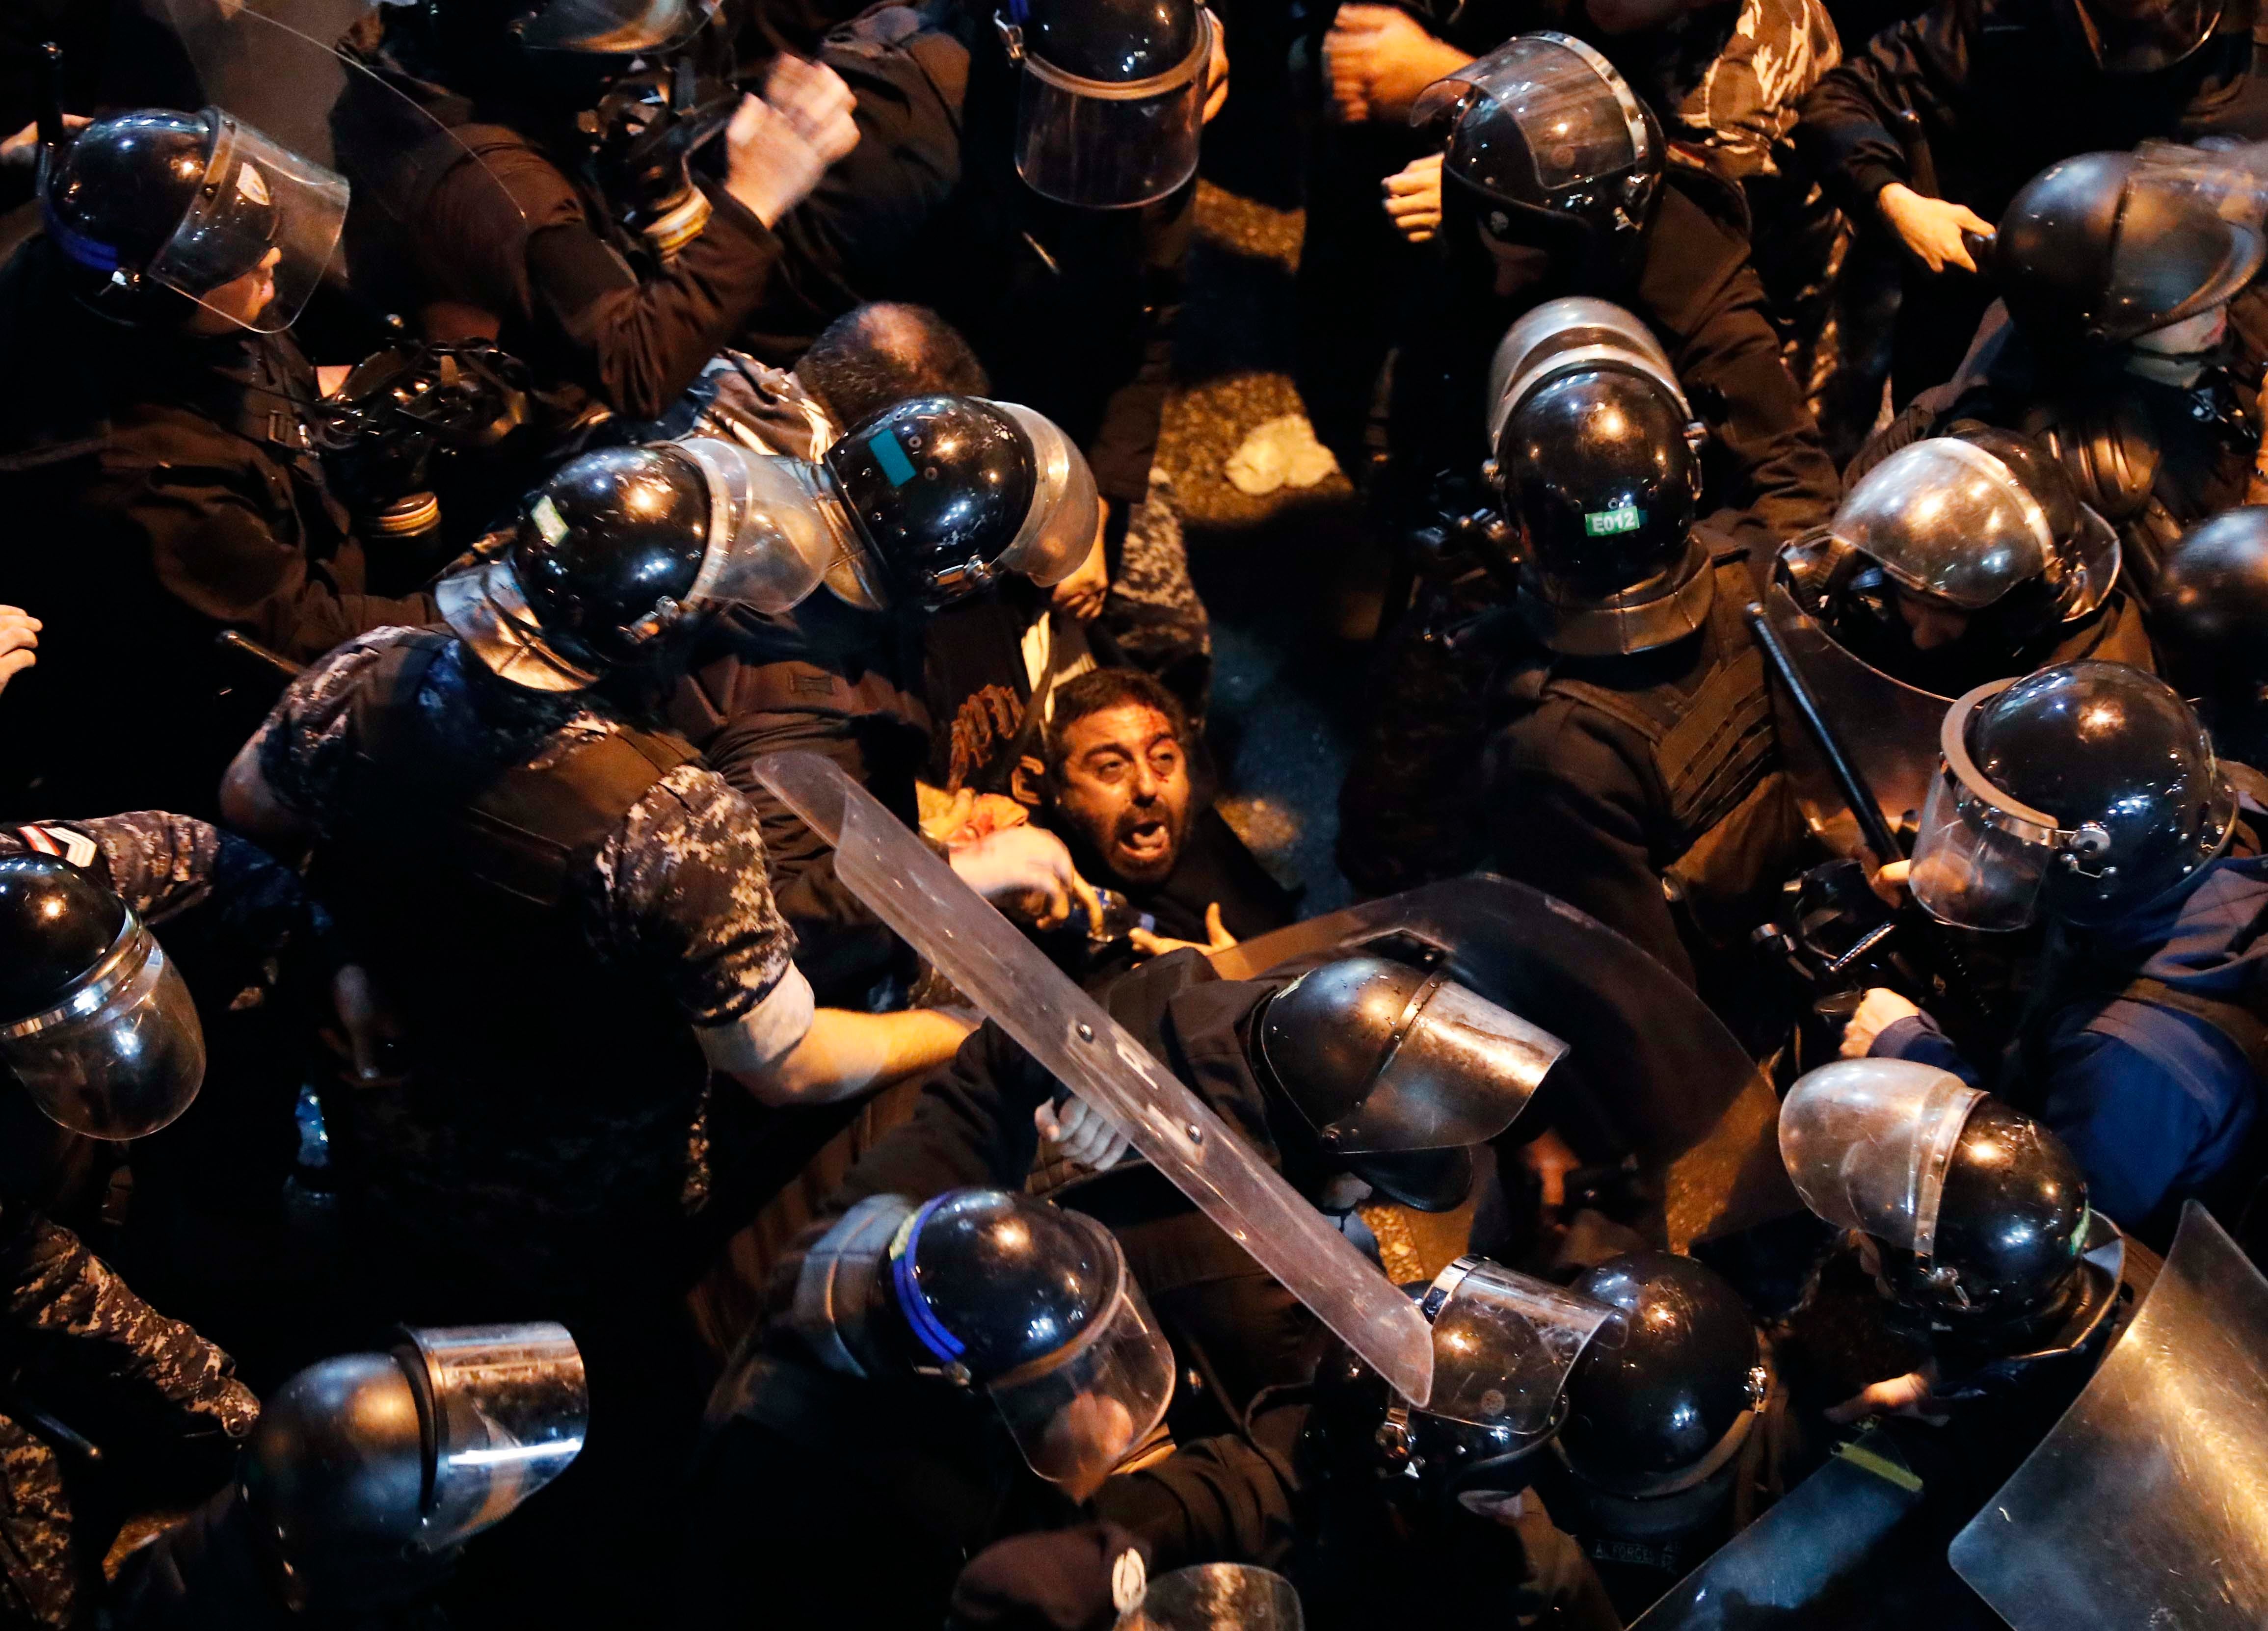 Lebanon: Police Violence Against Protesters